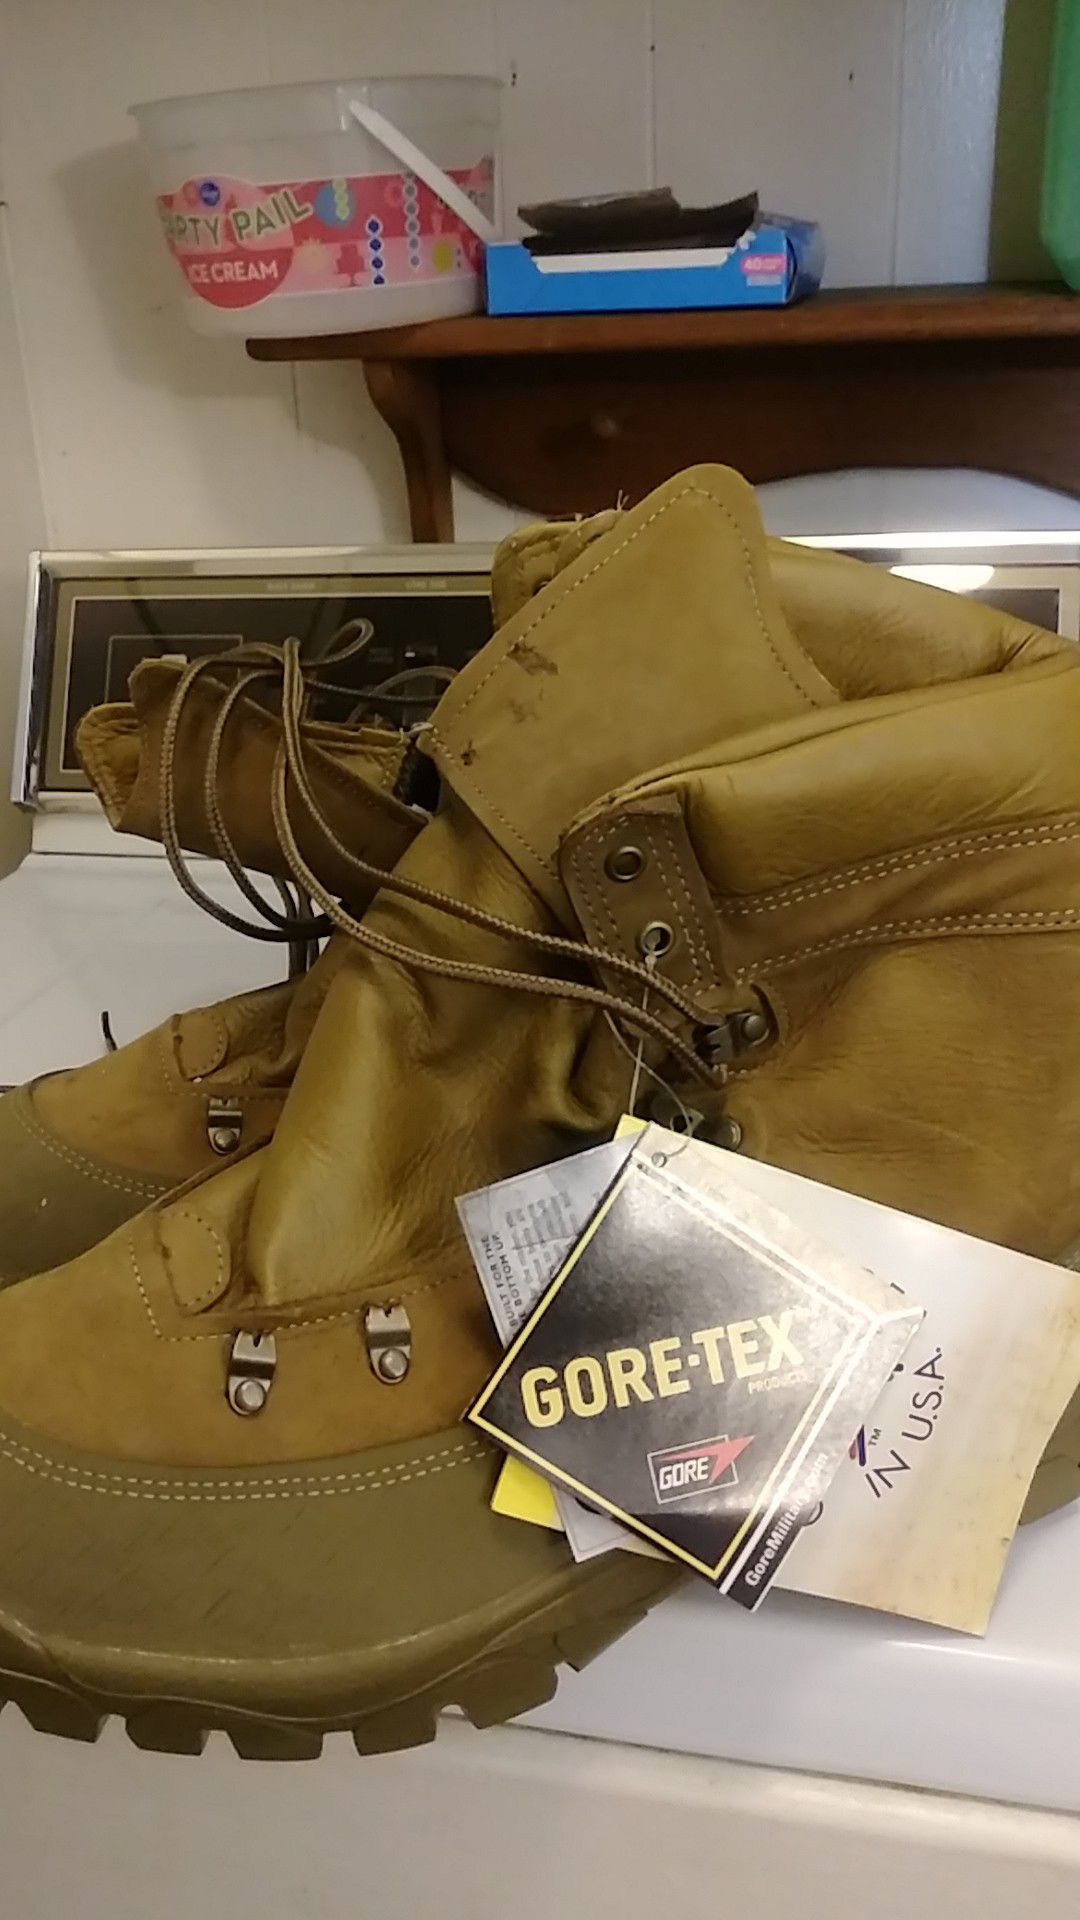 Gore tex sold on military